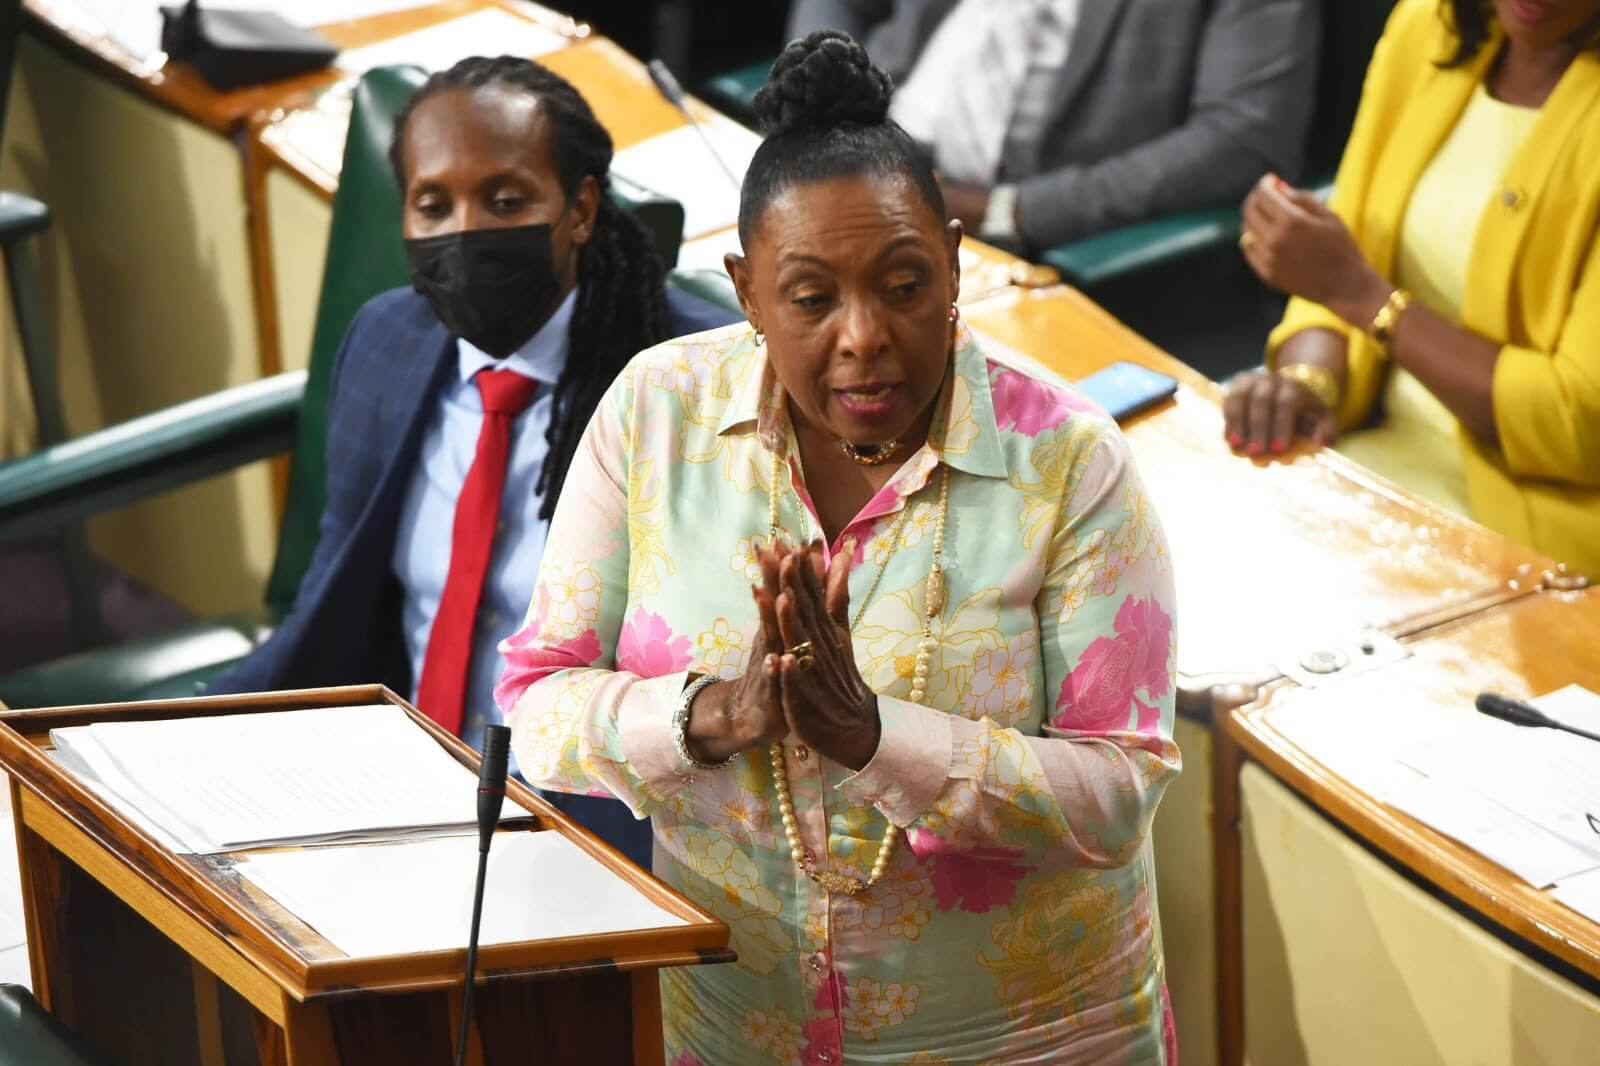 A sexual harassment complaints unit is being established in Jamaica